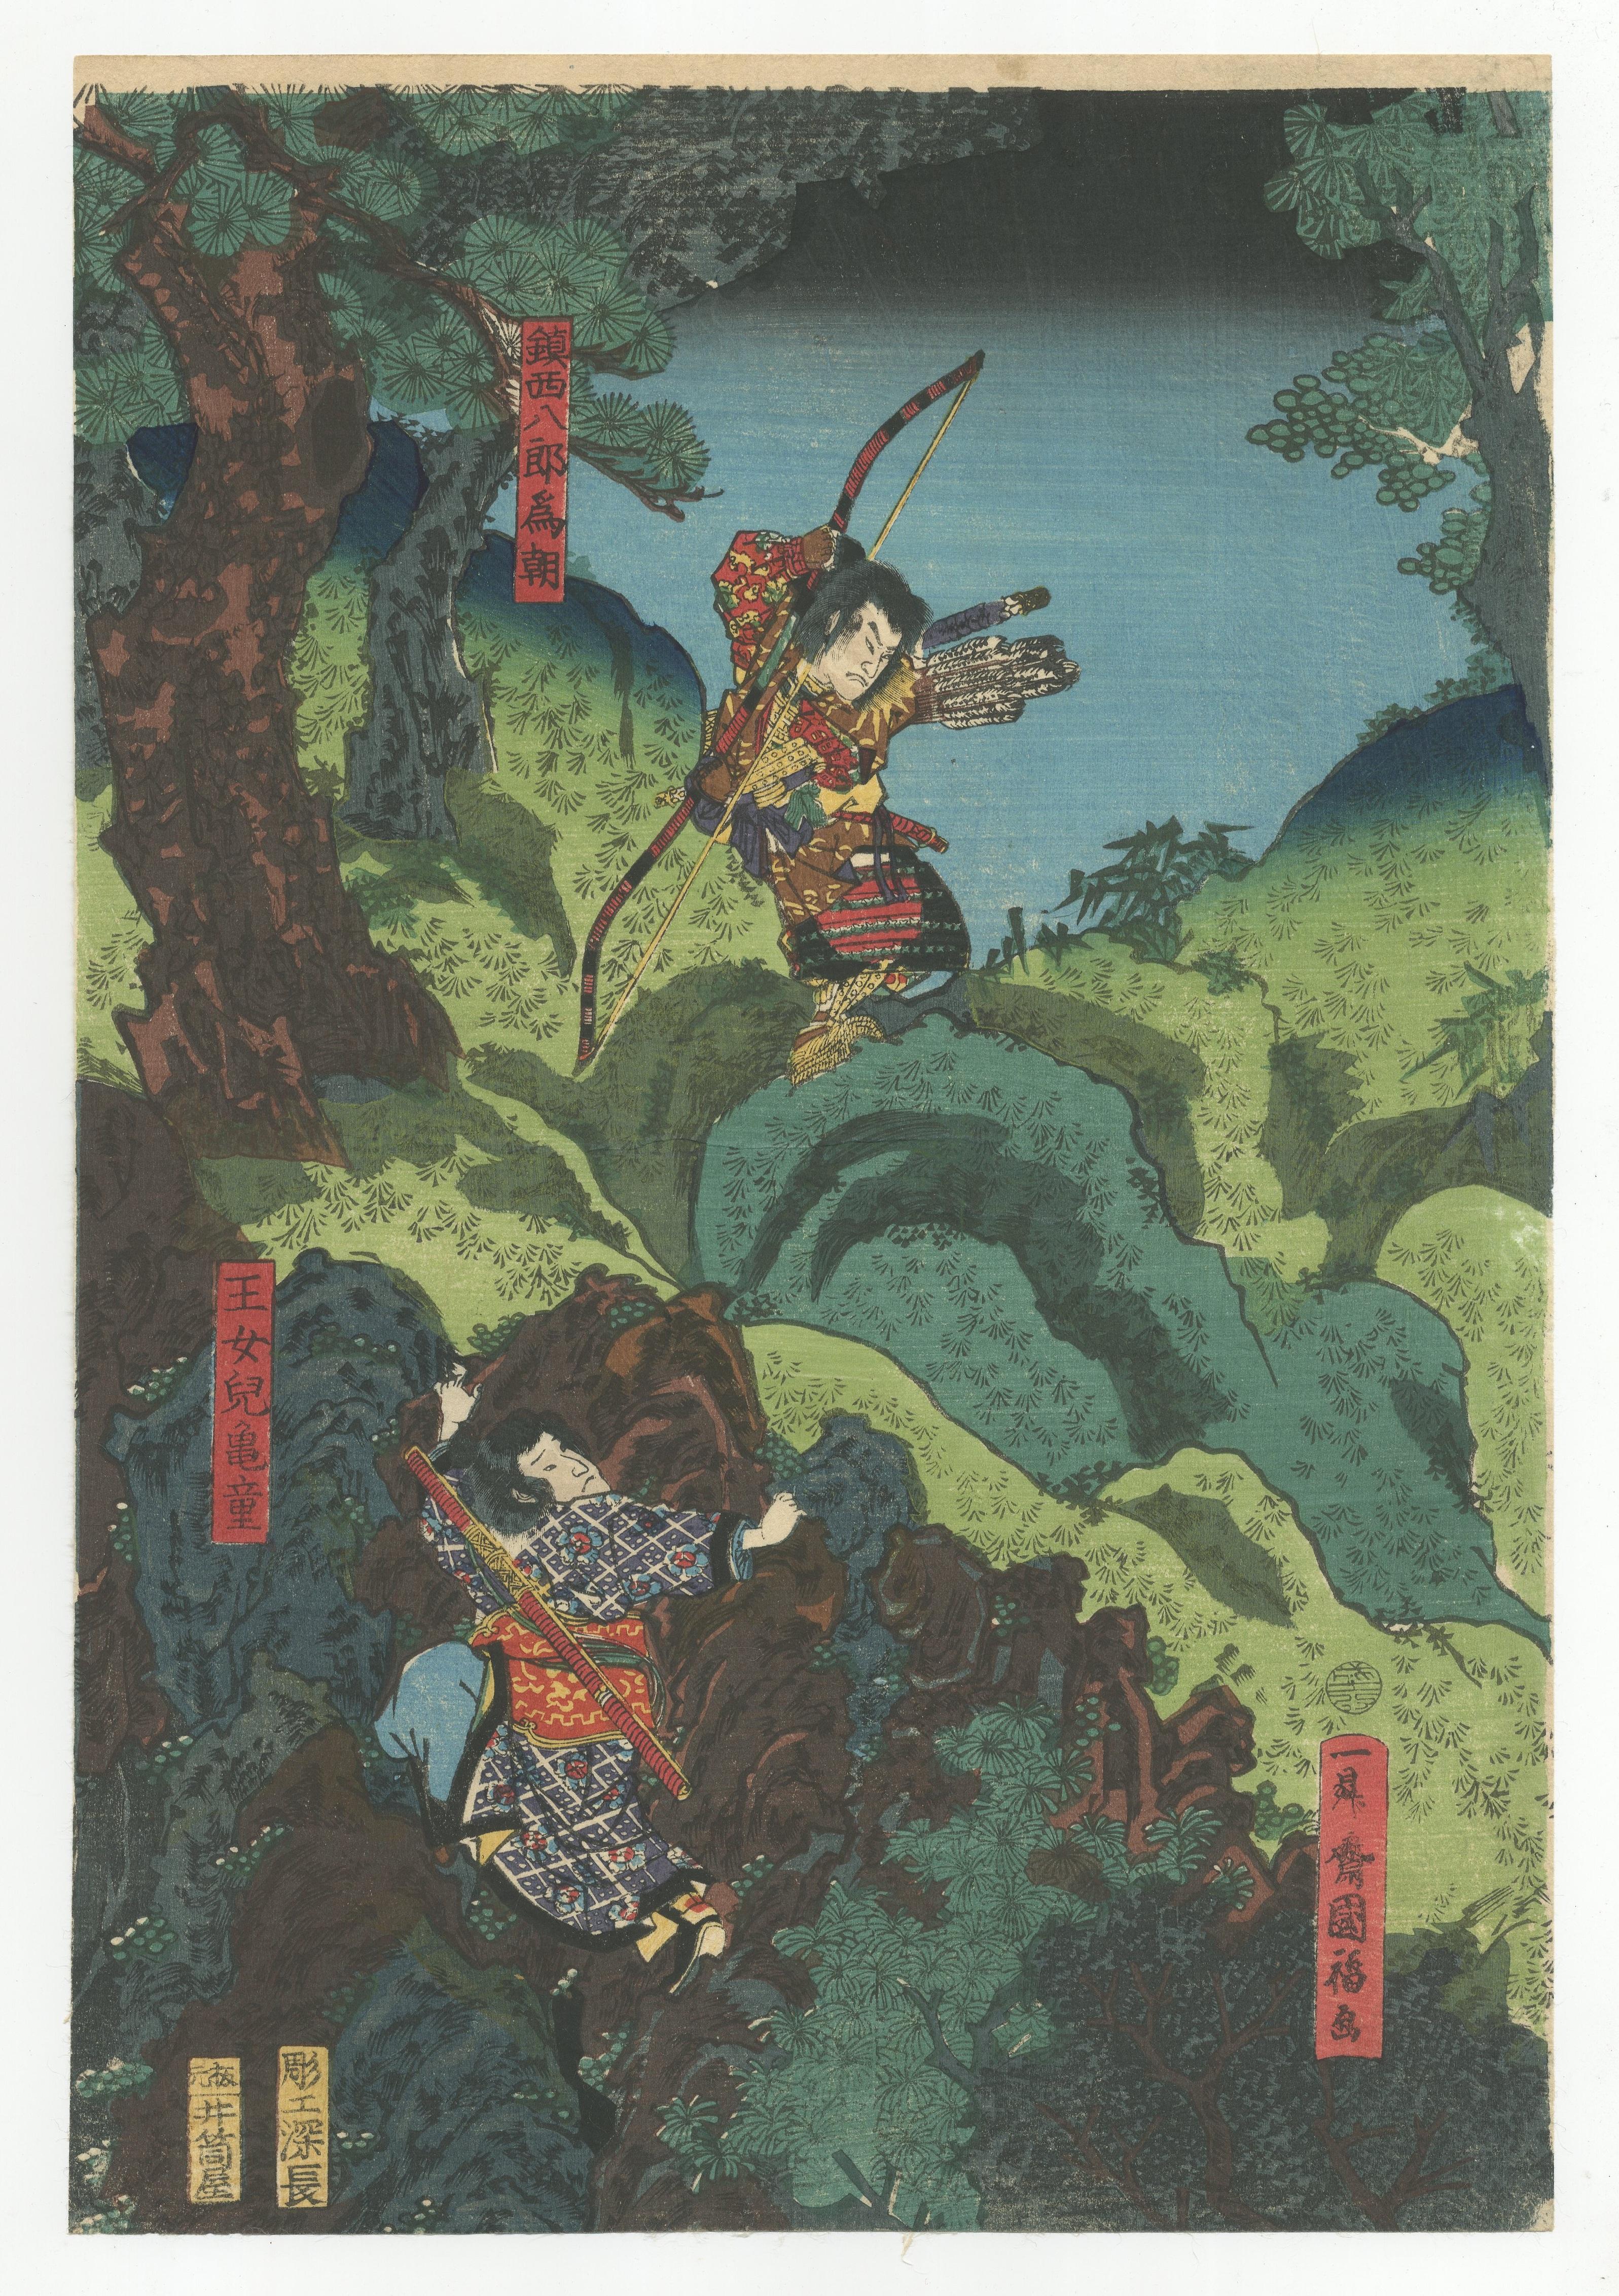 Artist: Kunifuku Utagawa (fl. 1854-1864)
Title: The Picture of Lord Tametomo Attacking a Giant Bird
Publisher: Izutsuya
Date: 1862
Dimensions: (L) 24.6 x 36.4 (C) 24.5 x 36.2 (R) 24.6 x 36.3 cm

In medieval times, the gulf between Mainland